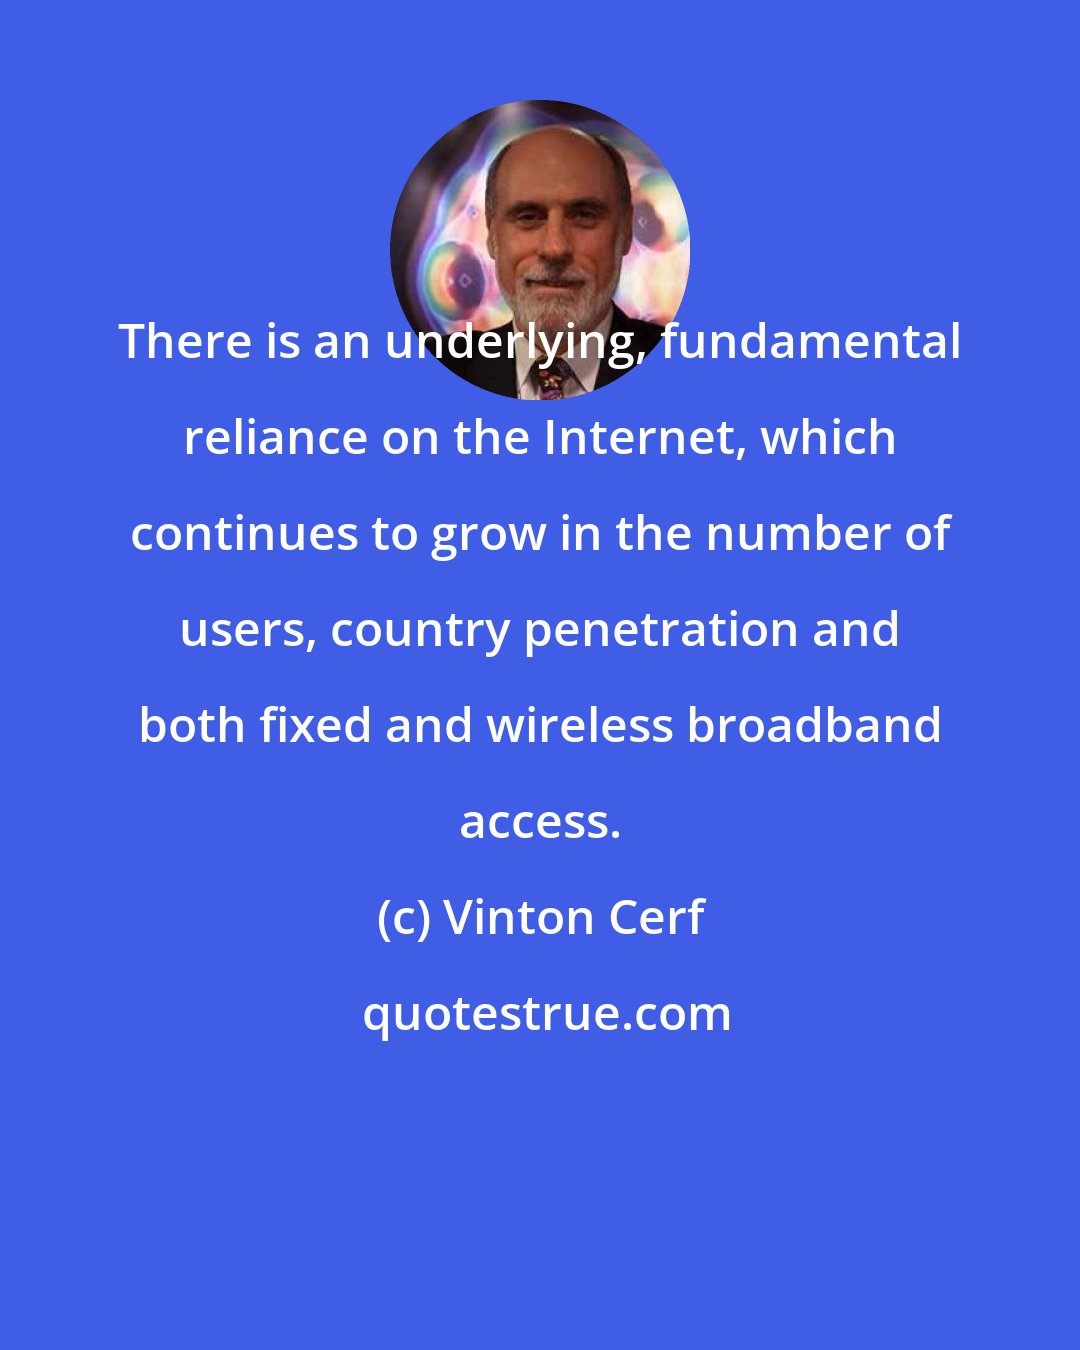 Vinton Cerf: There is an underlying, fundamental reliance on the Internet, which continues to grow in the number of users, country penetration and both fixed and wireless broadband access.